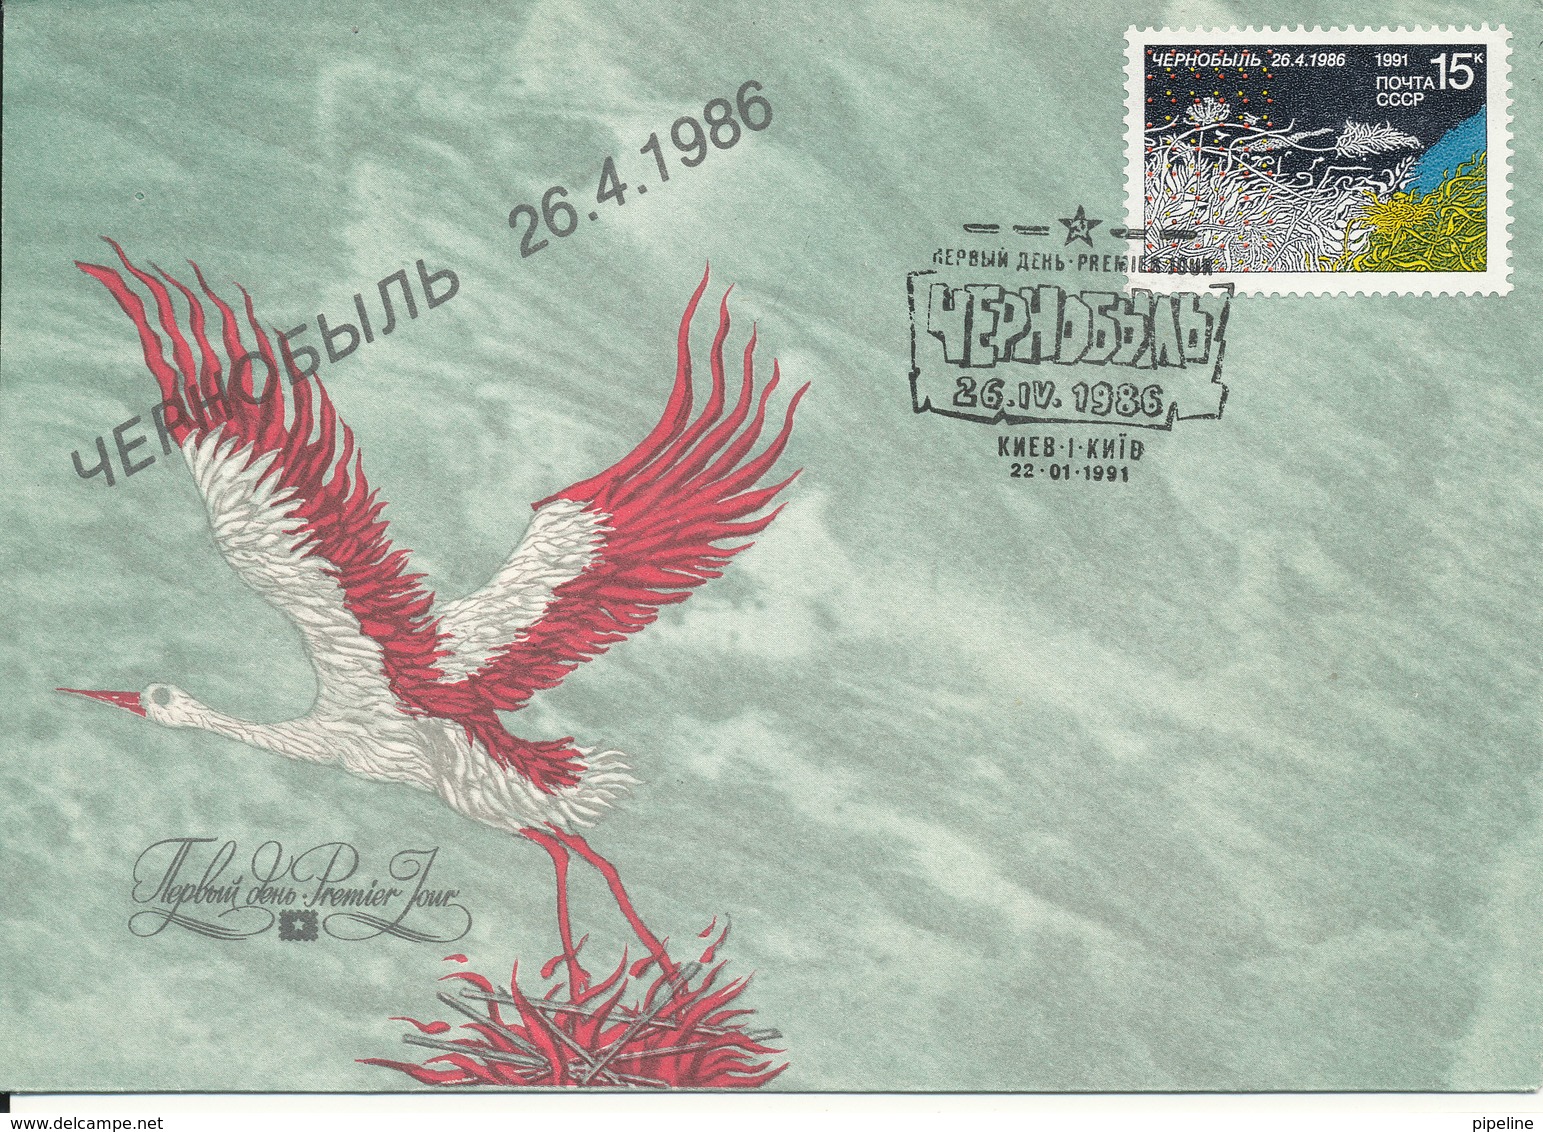 USSR FDC 22-1-1991 5th Anniversary Of The Chernobyl Disaster 26-4-1986 With Cachet - FDC